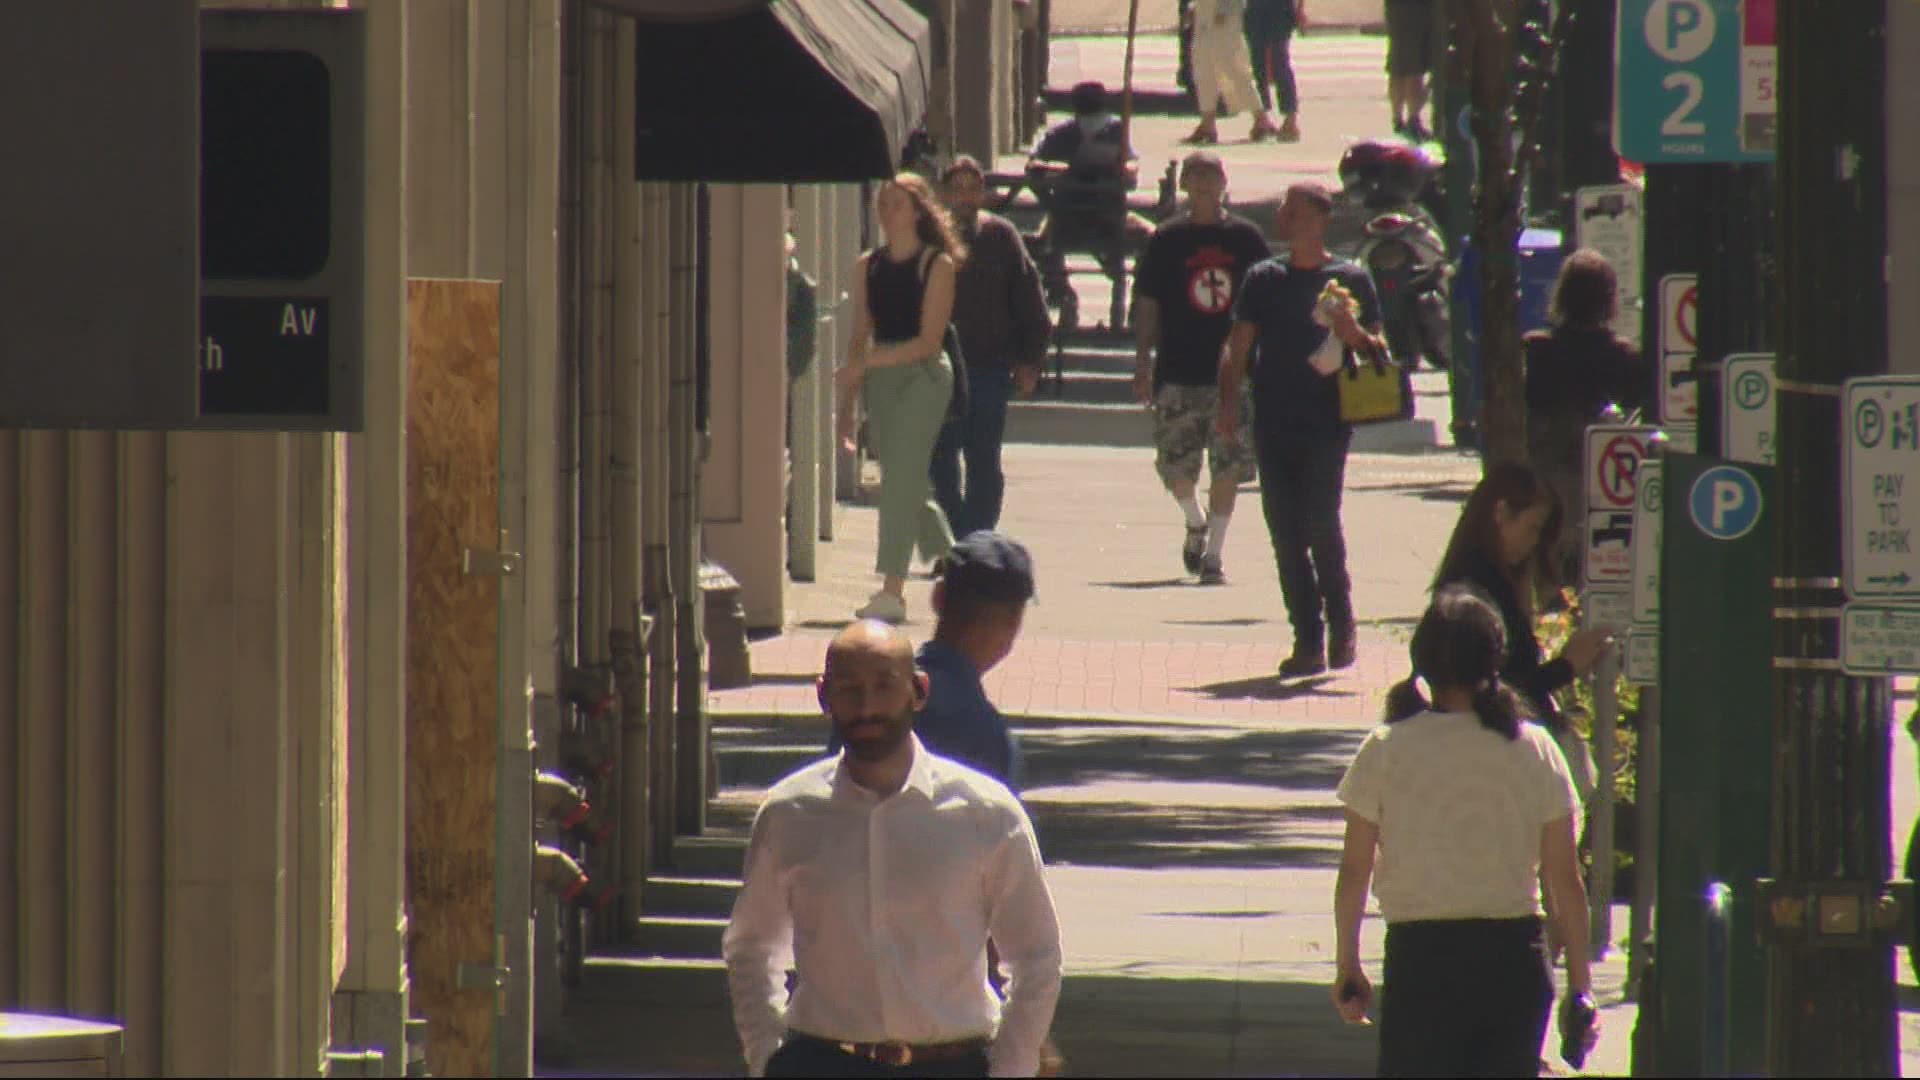 Portland is throwing a weekend celebration to announce the reopening of downtown. The city is encouraging people to come back to area businesses.